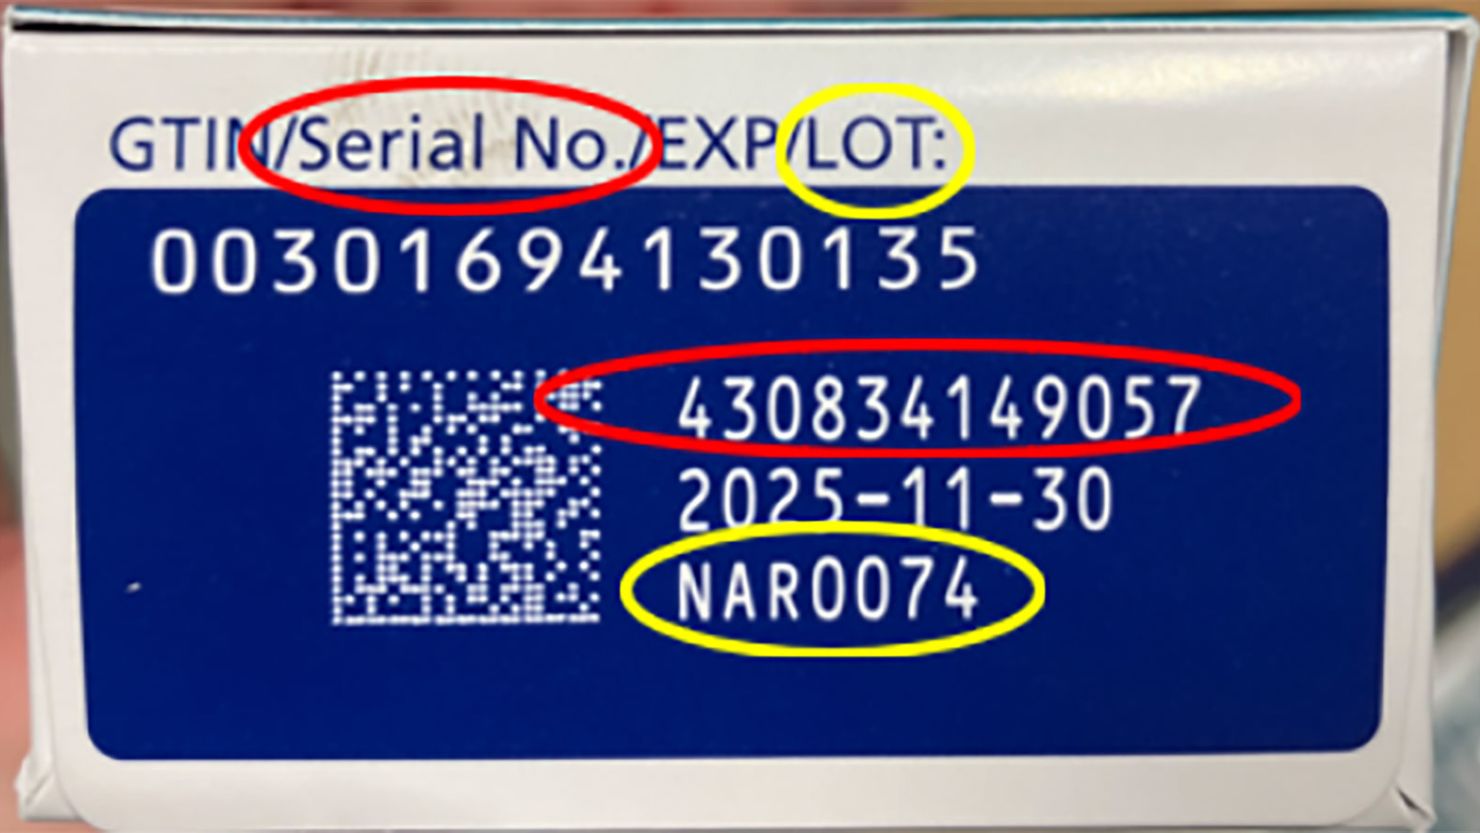 The FDA is investigating counterfeit Ozempic in the US drug supply. The agency warns against using products labeled with lot number NAR0074 and serial number 430834149057 as pictured.